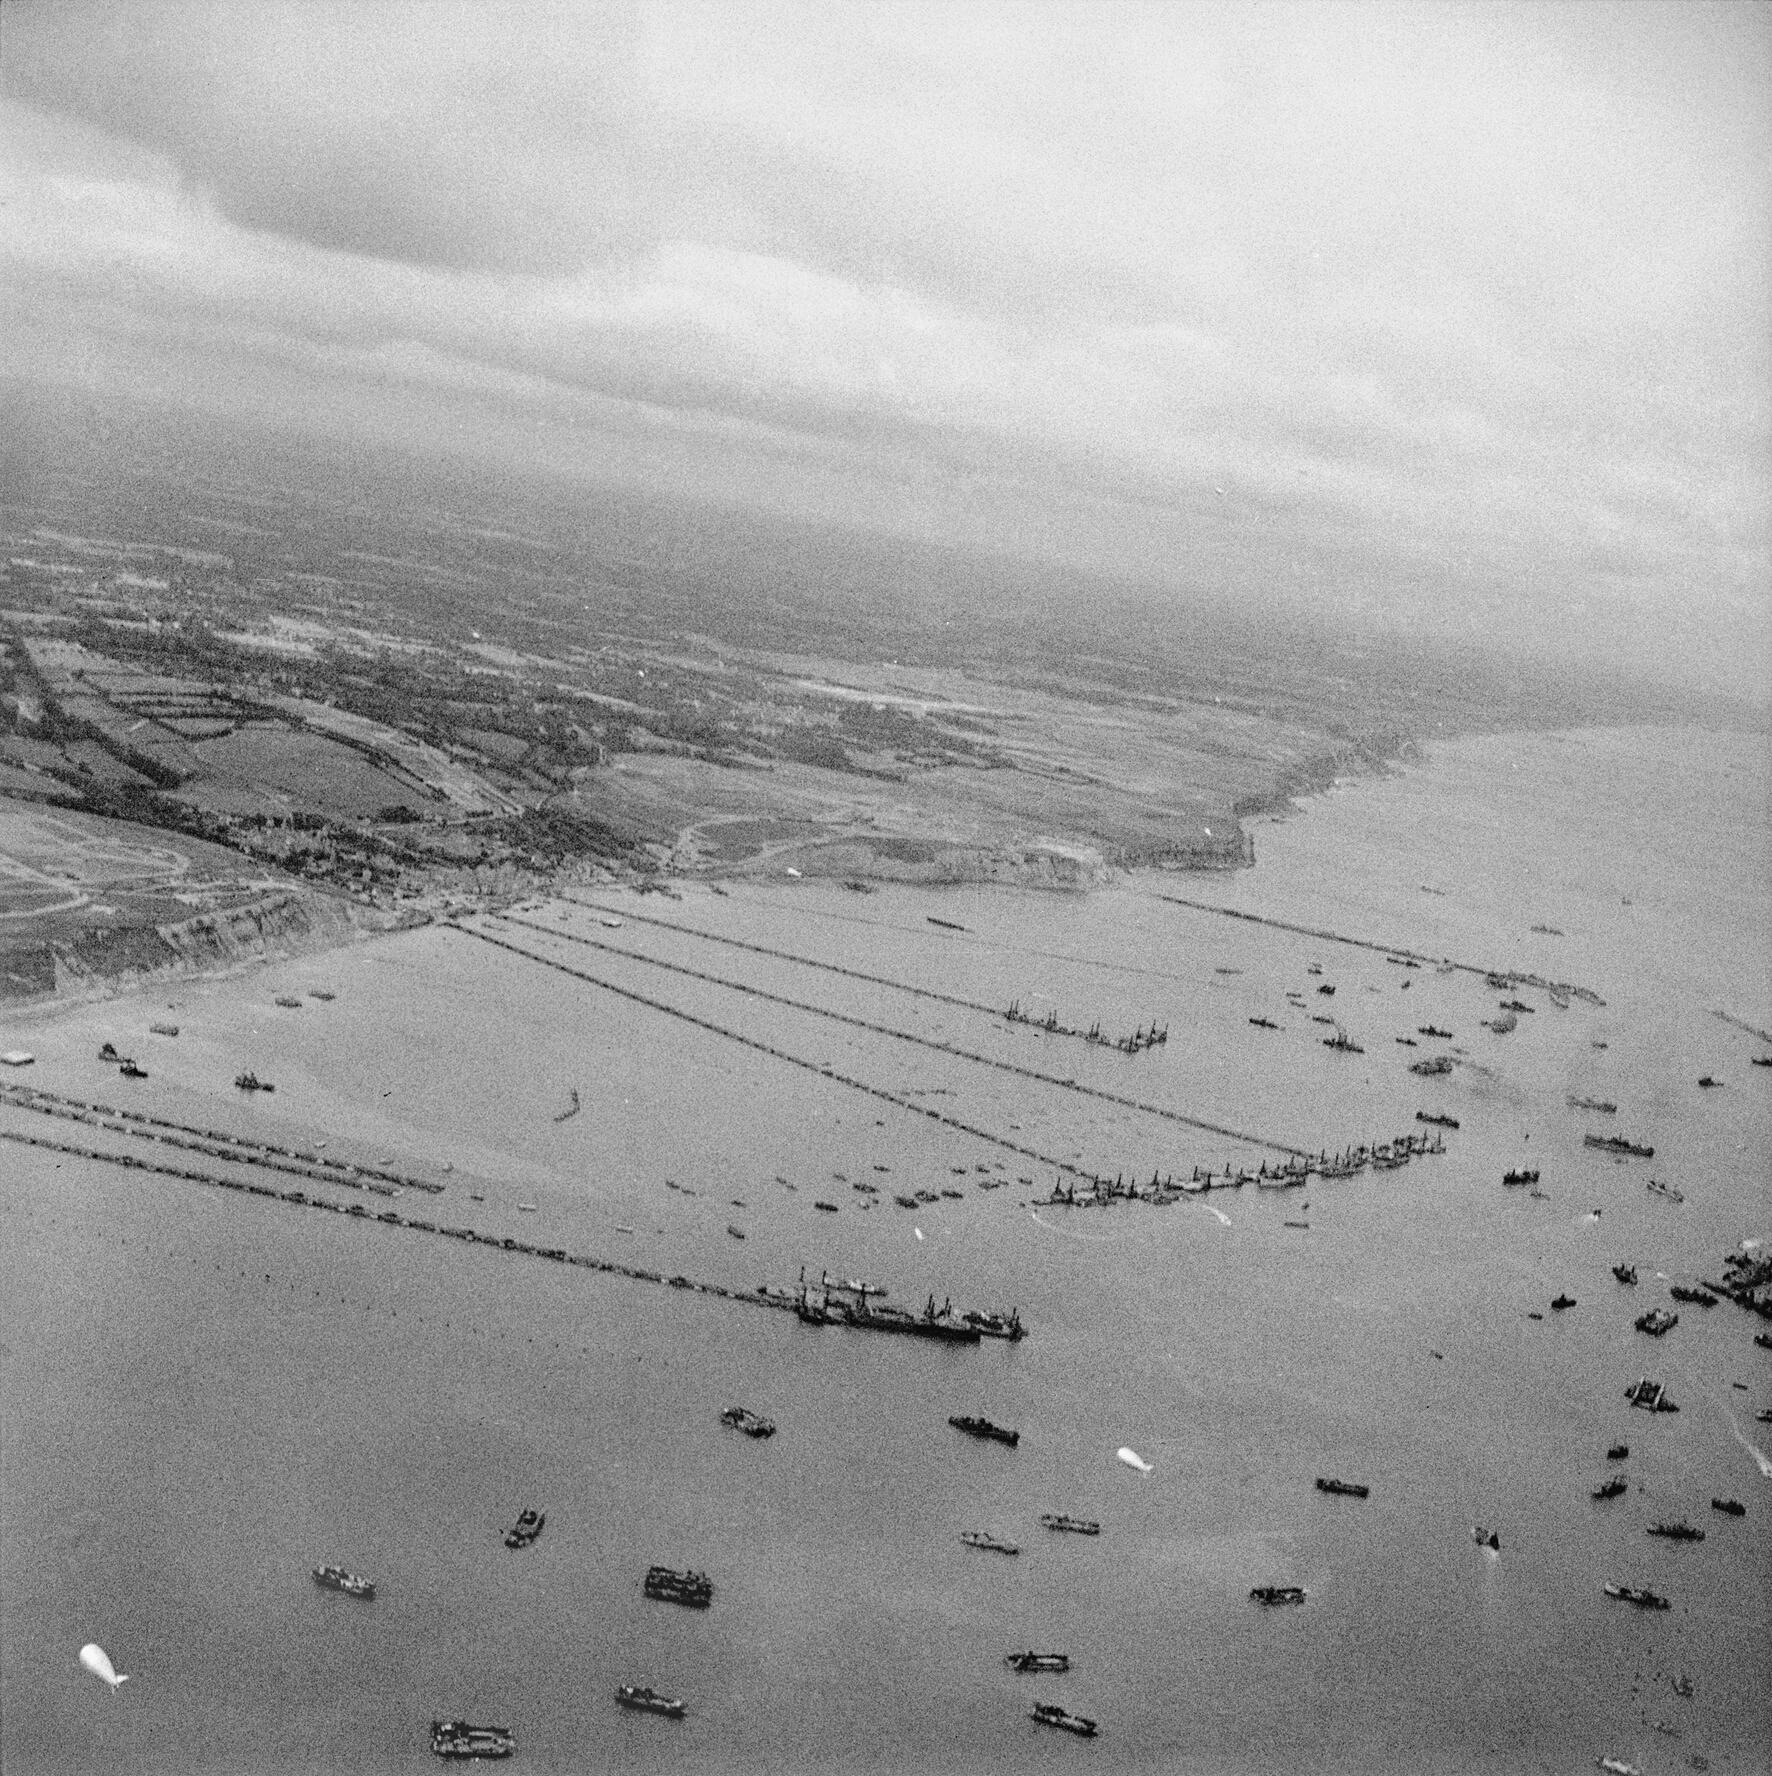 Mulberry harbour - Wikipedia